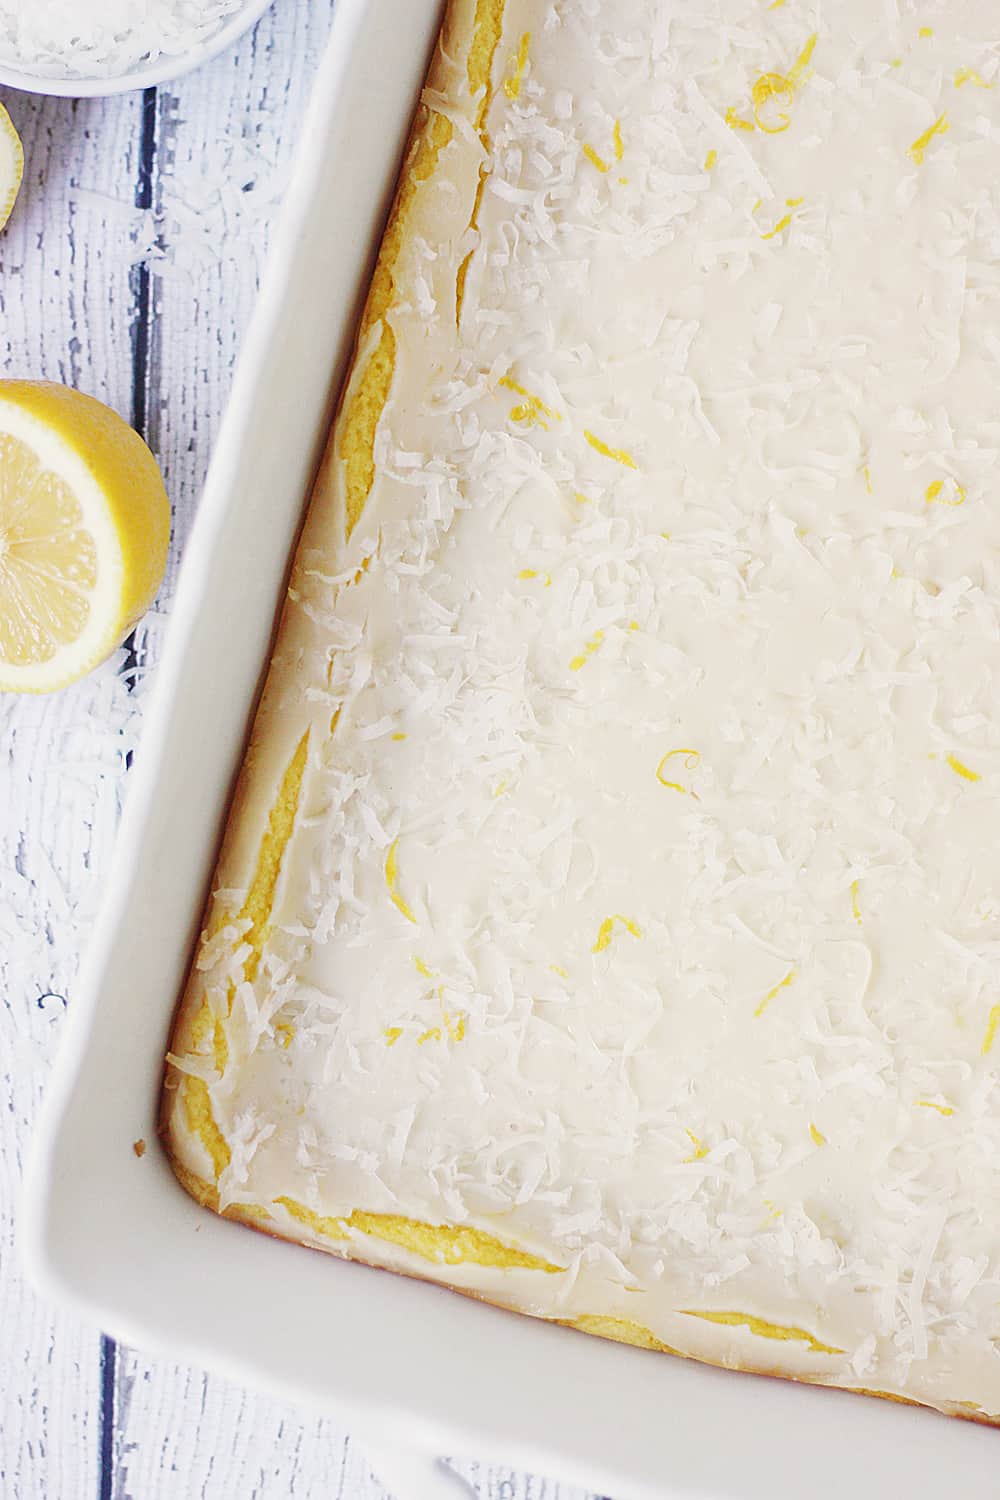 Easy Lemon Bars with a Cake Mix in a Pan closer view